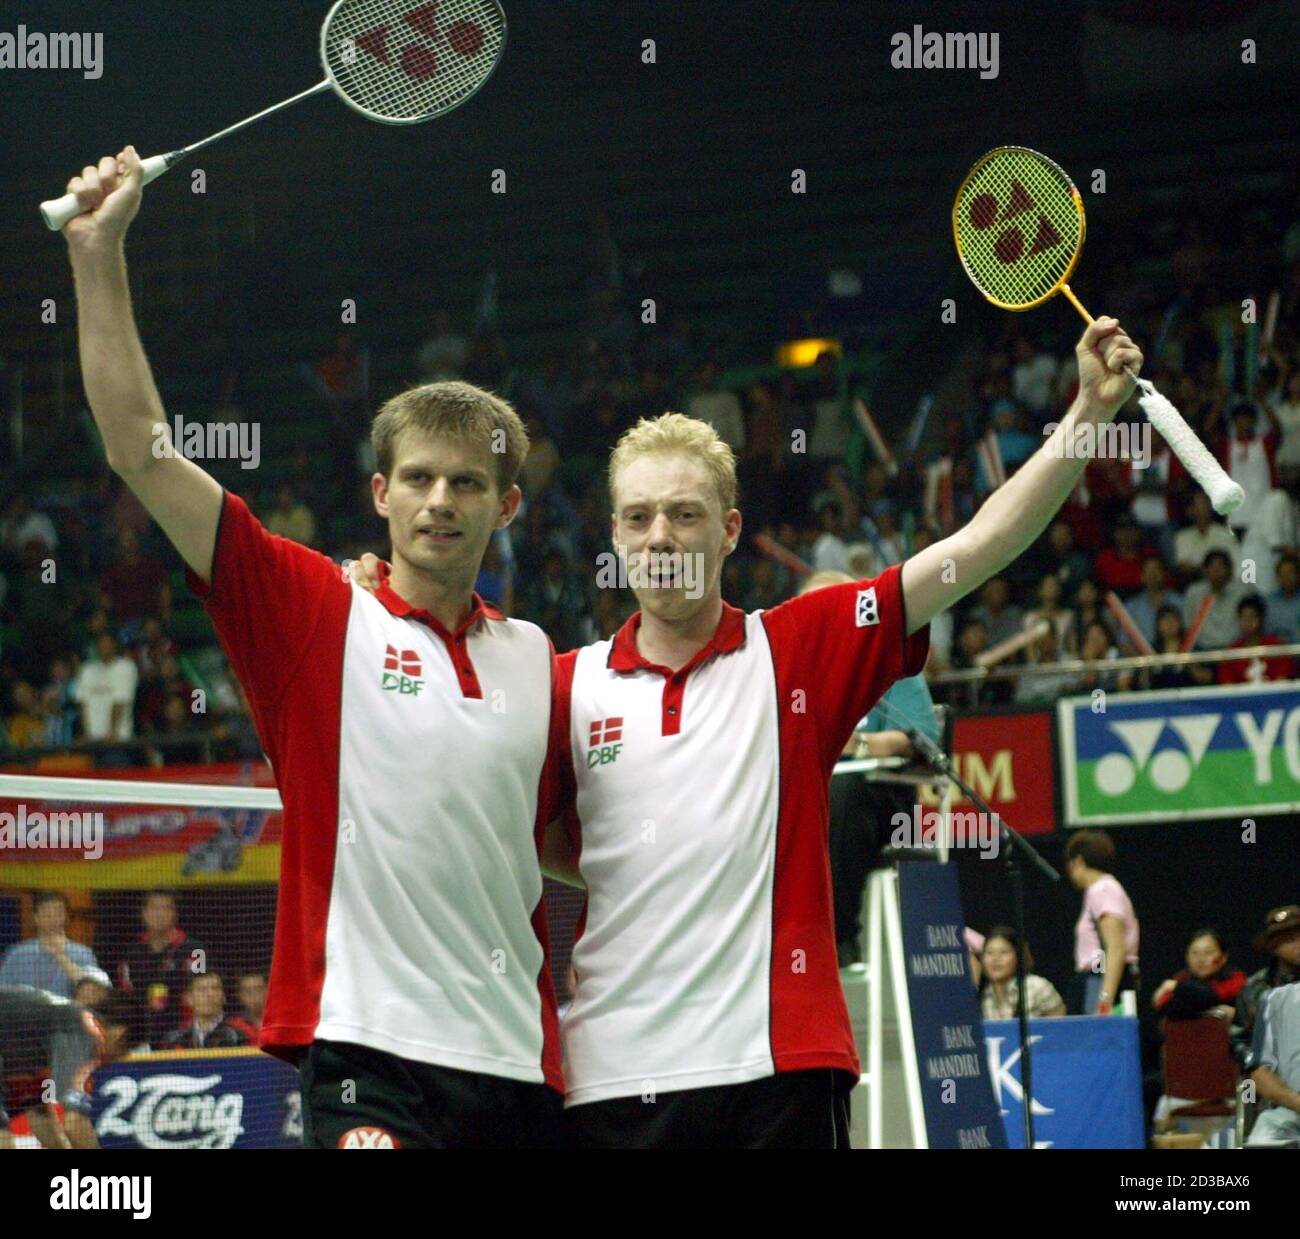 Denmark's Jonas Rasmussen (L) and Lars Paaske celebrate victory over  Chinese Cai Yun and Fu Haifeng during the final match of the mens double's  Thomas Cup badminton tournament in Jakarta on May